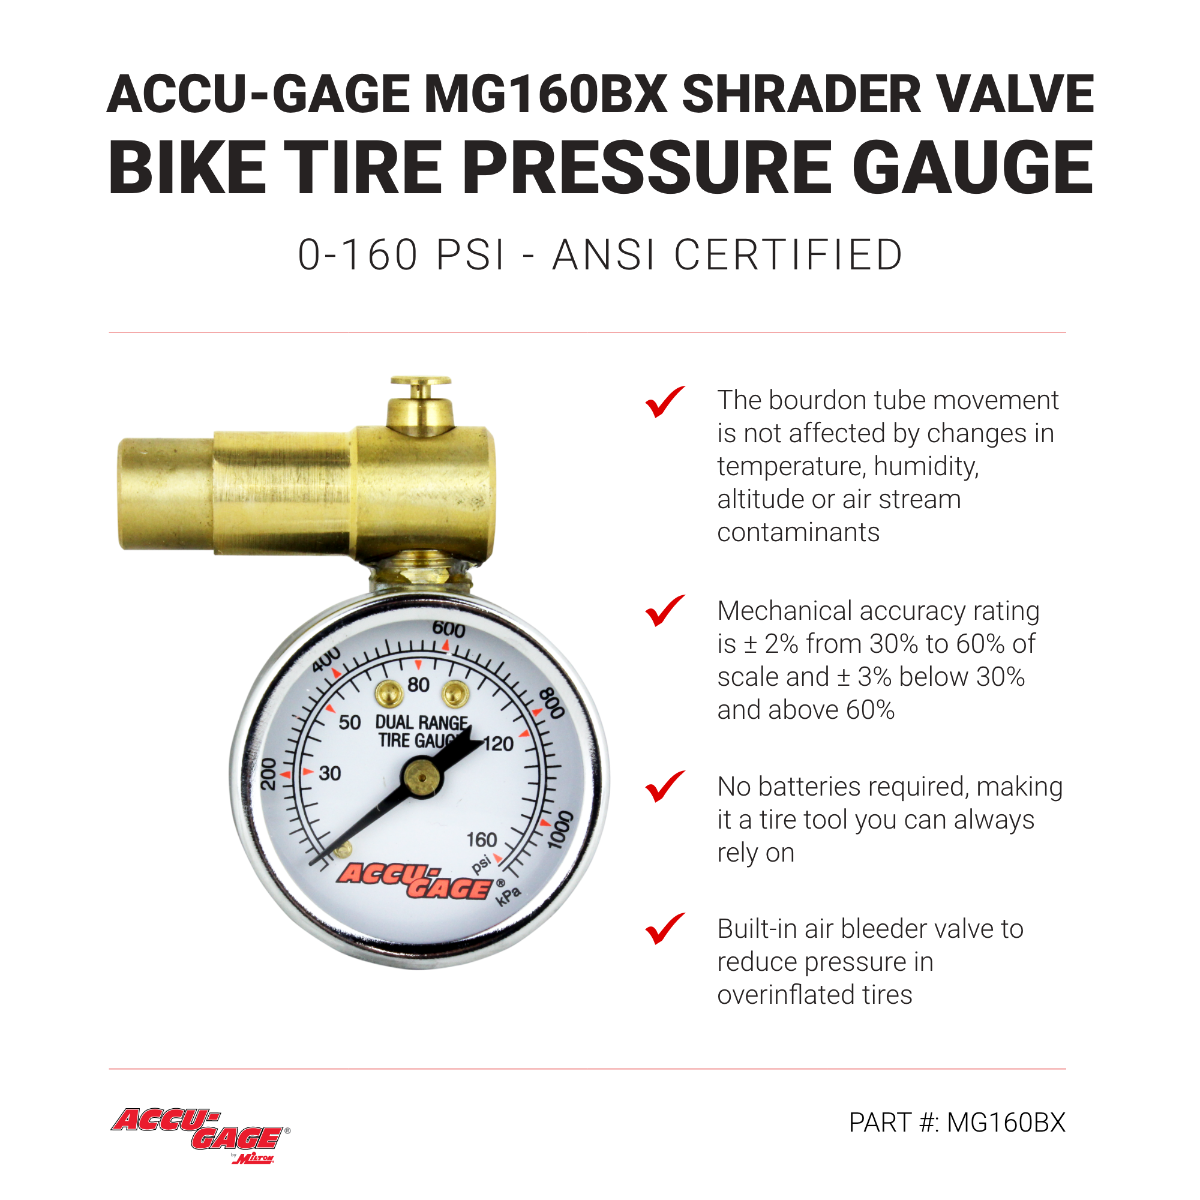 ACCU-GAGE® by Milton® Shrader Valve Bike Tire Pressure Gauge with Bleed Valve, for 0-160 PSI - ANSI Certified